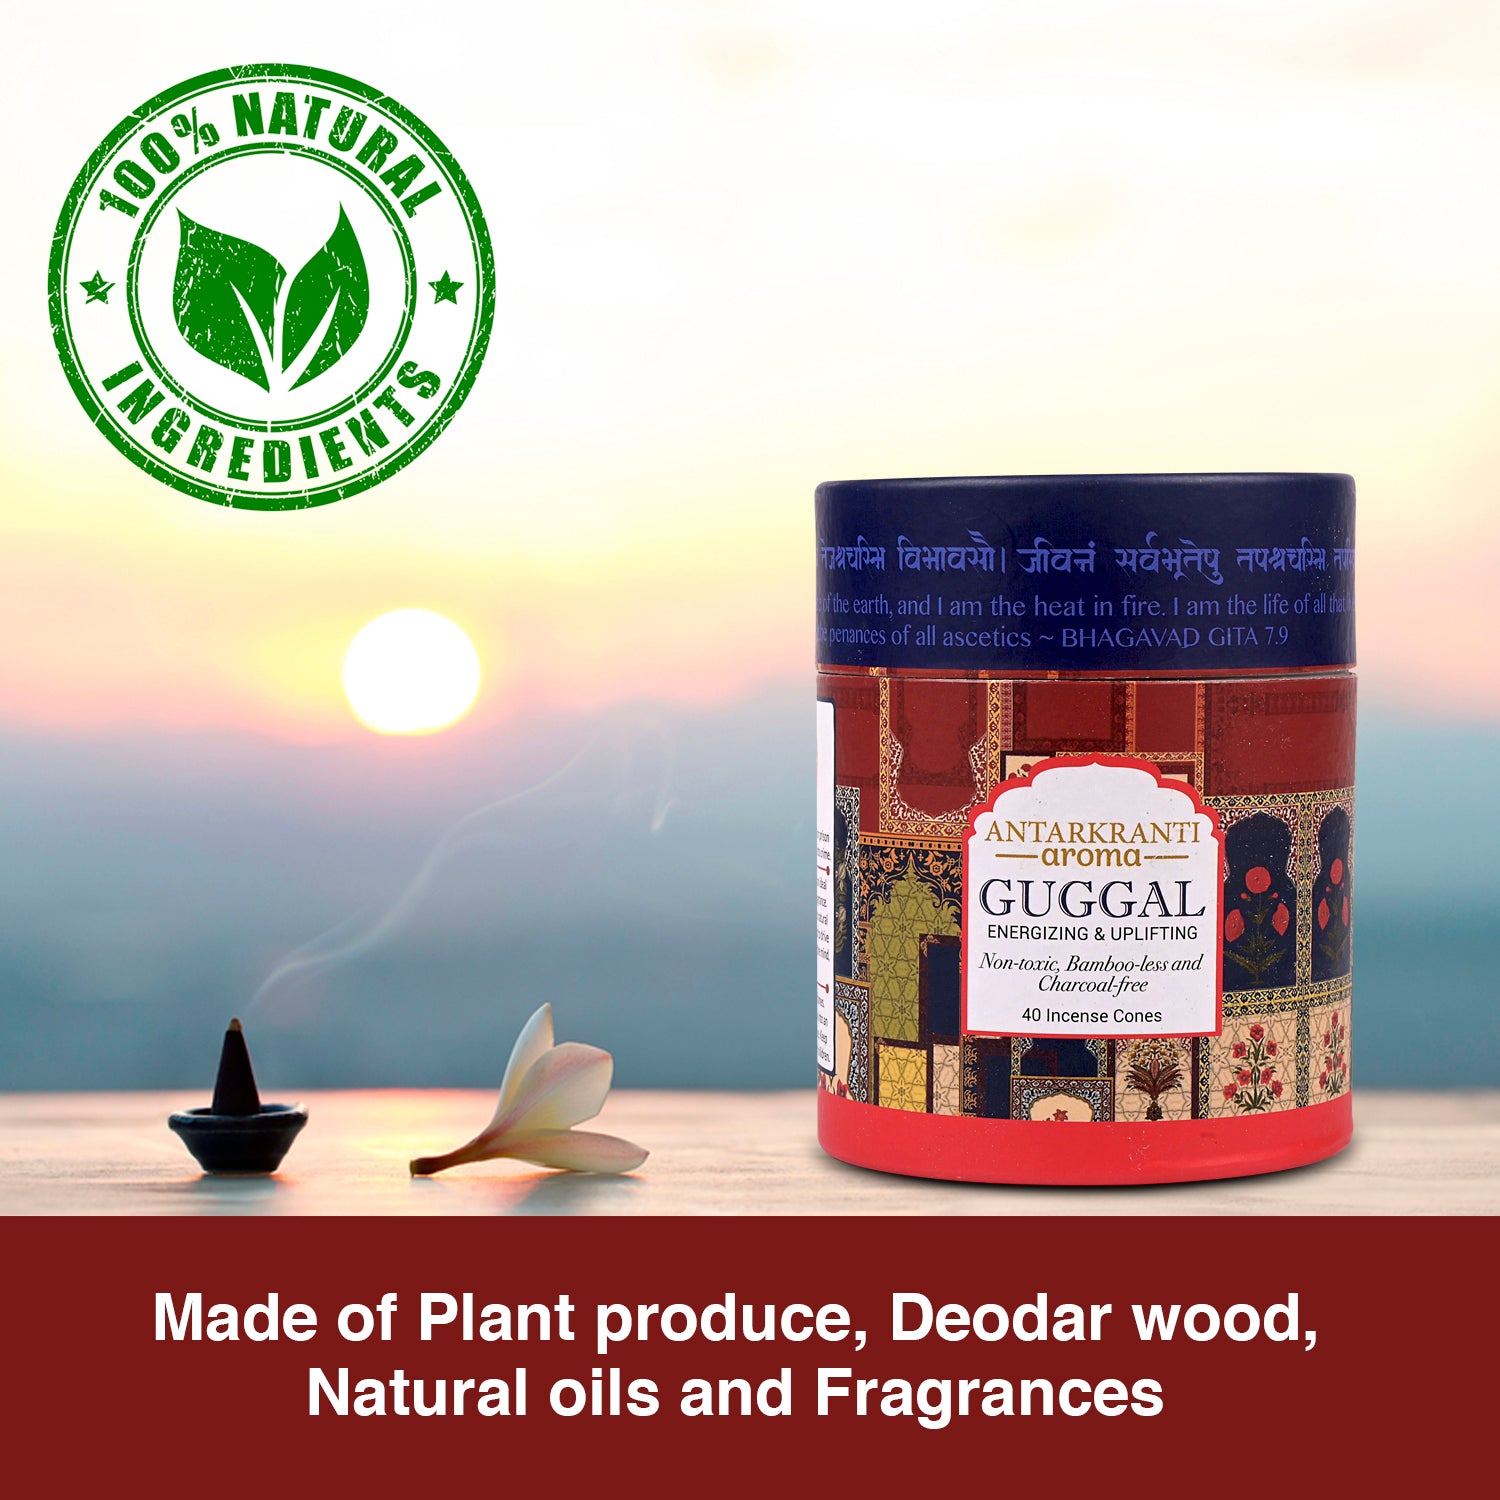 ANTARKRANTI Dry Dhoop GUGGAL Incense Cones | Low Smoke | Organic & Charcoal Free | Pooja | Aromatherapy | Meditation | Yoga | Sacred Life: Discover Tranquility